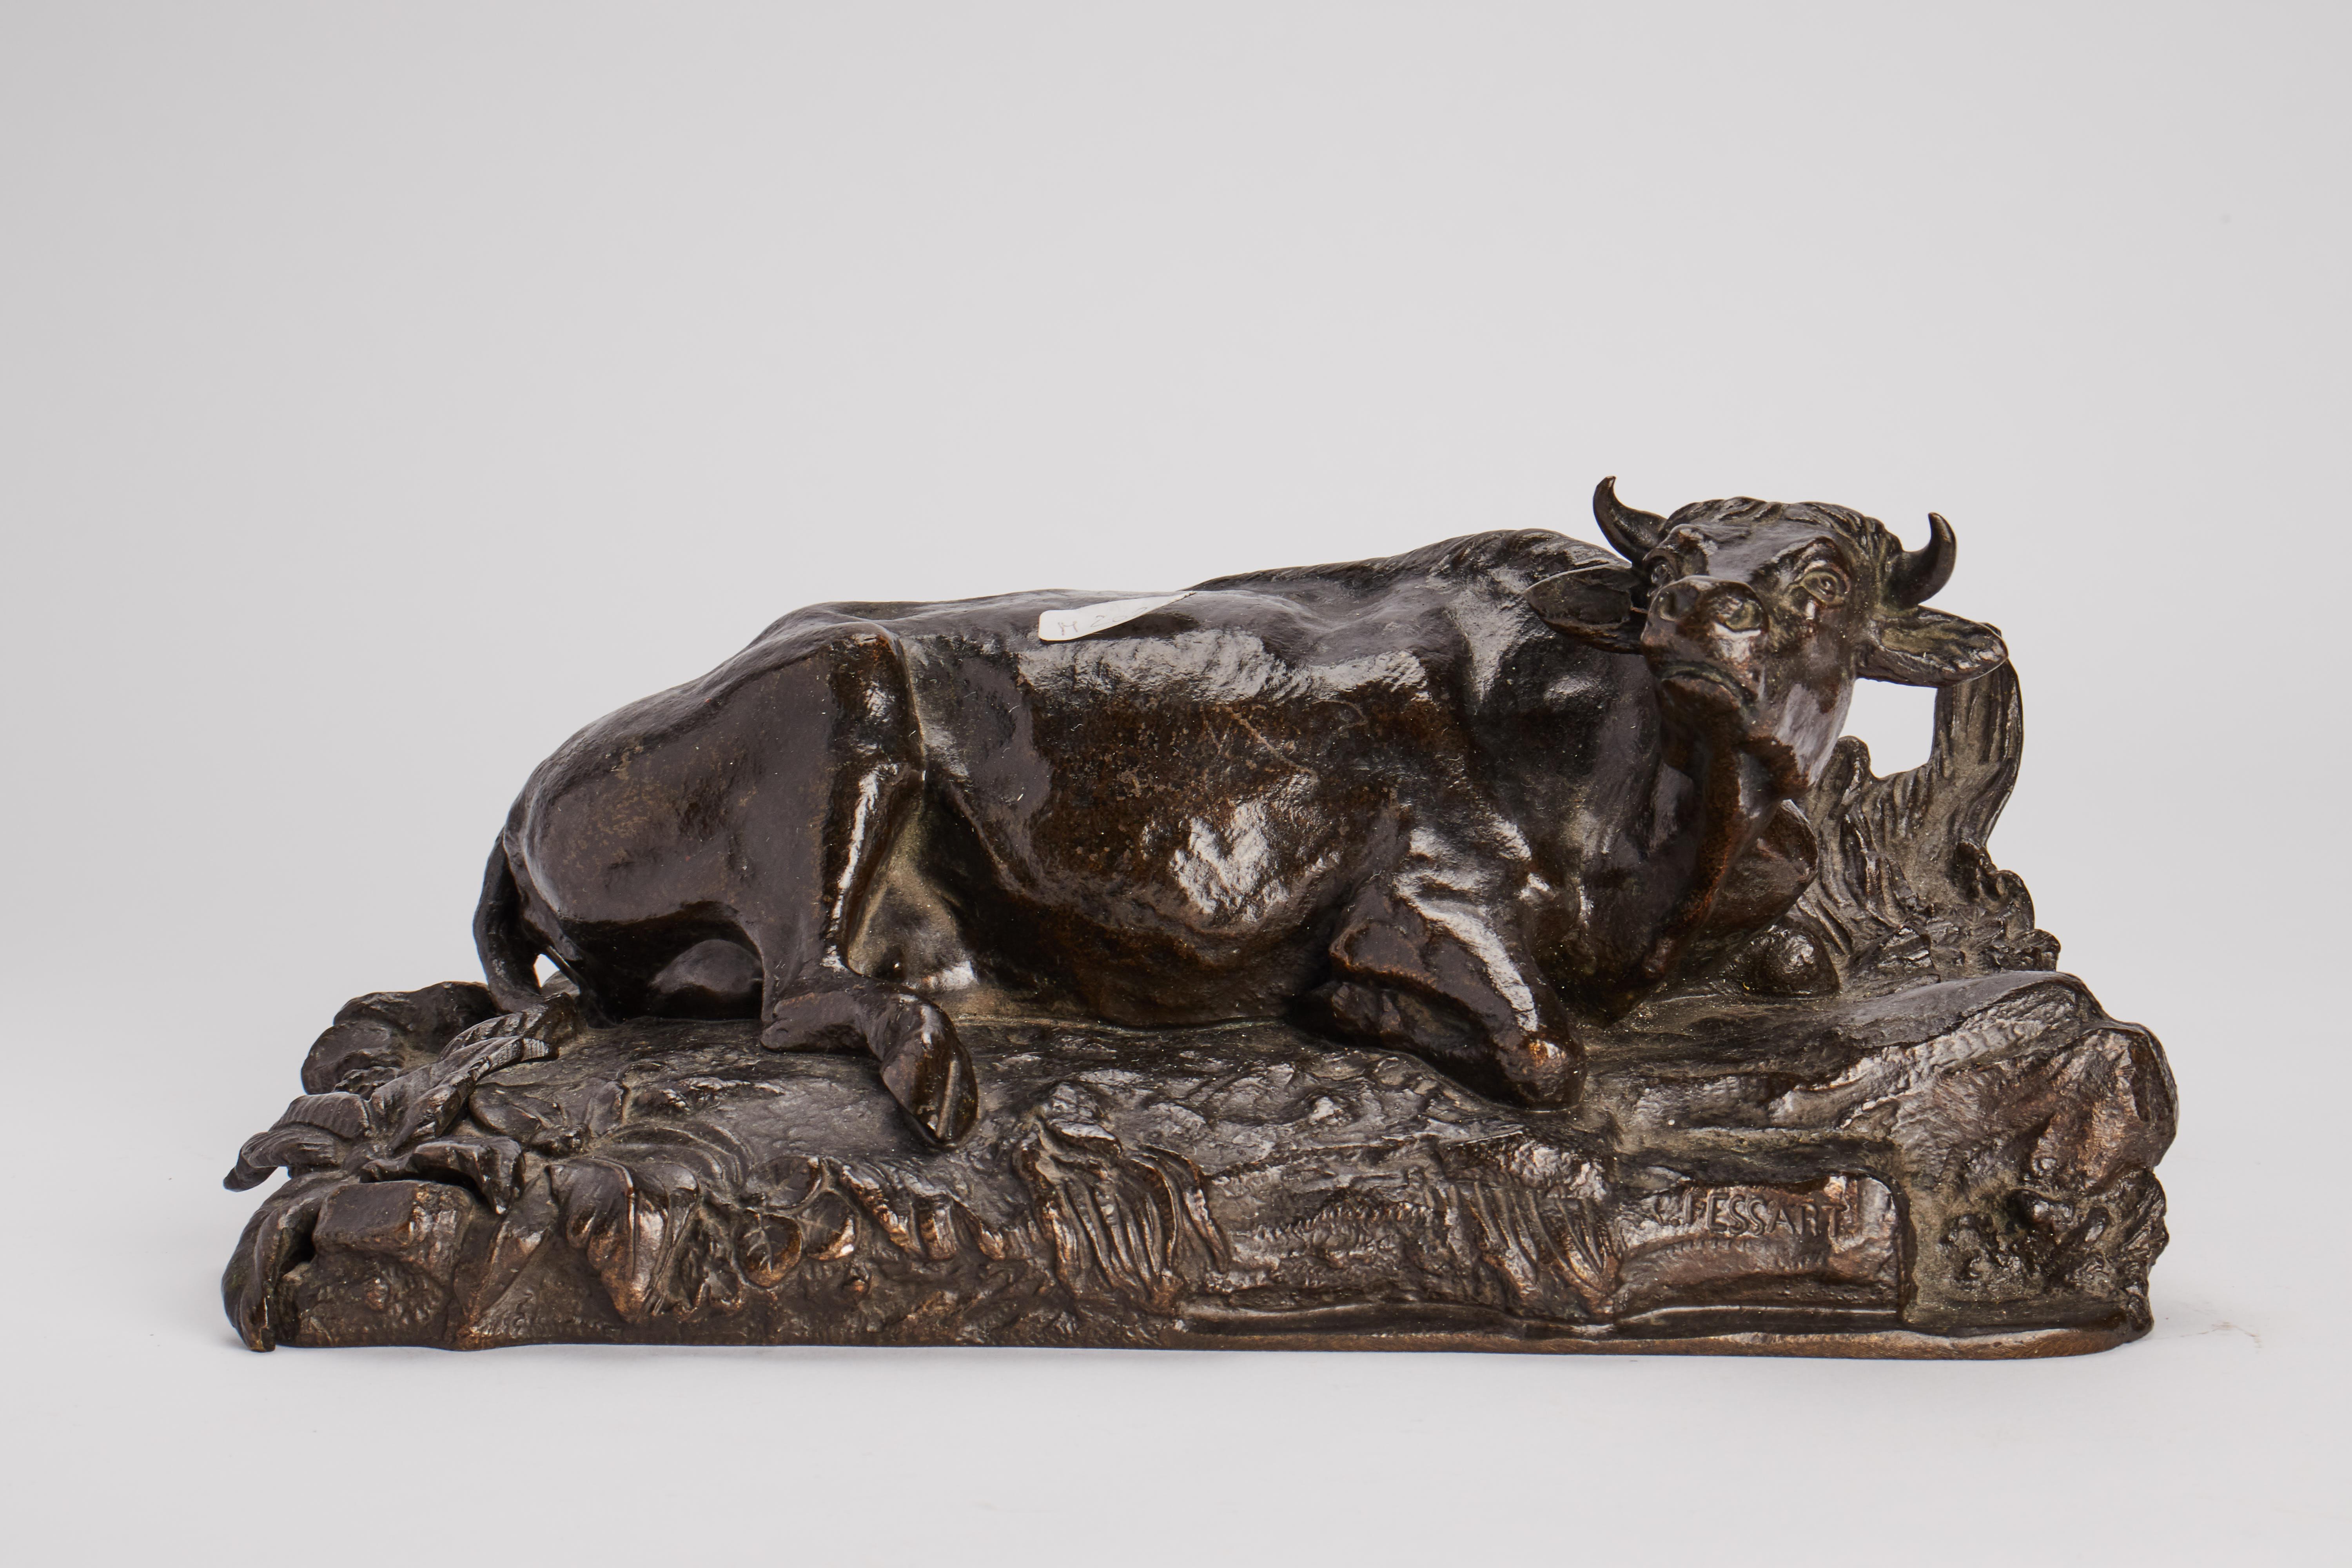 Lost wax cast bronze sculpture, depicting a cow lying in a meadow field. Signed “FESSART”. France, late 19th century.